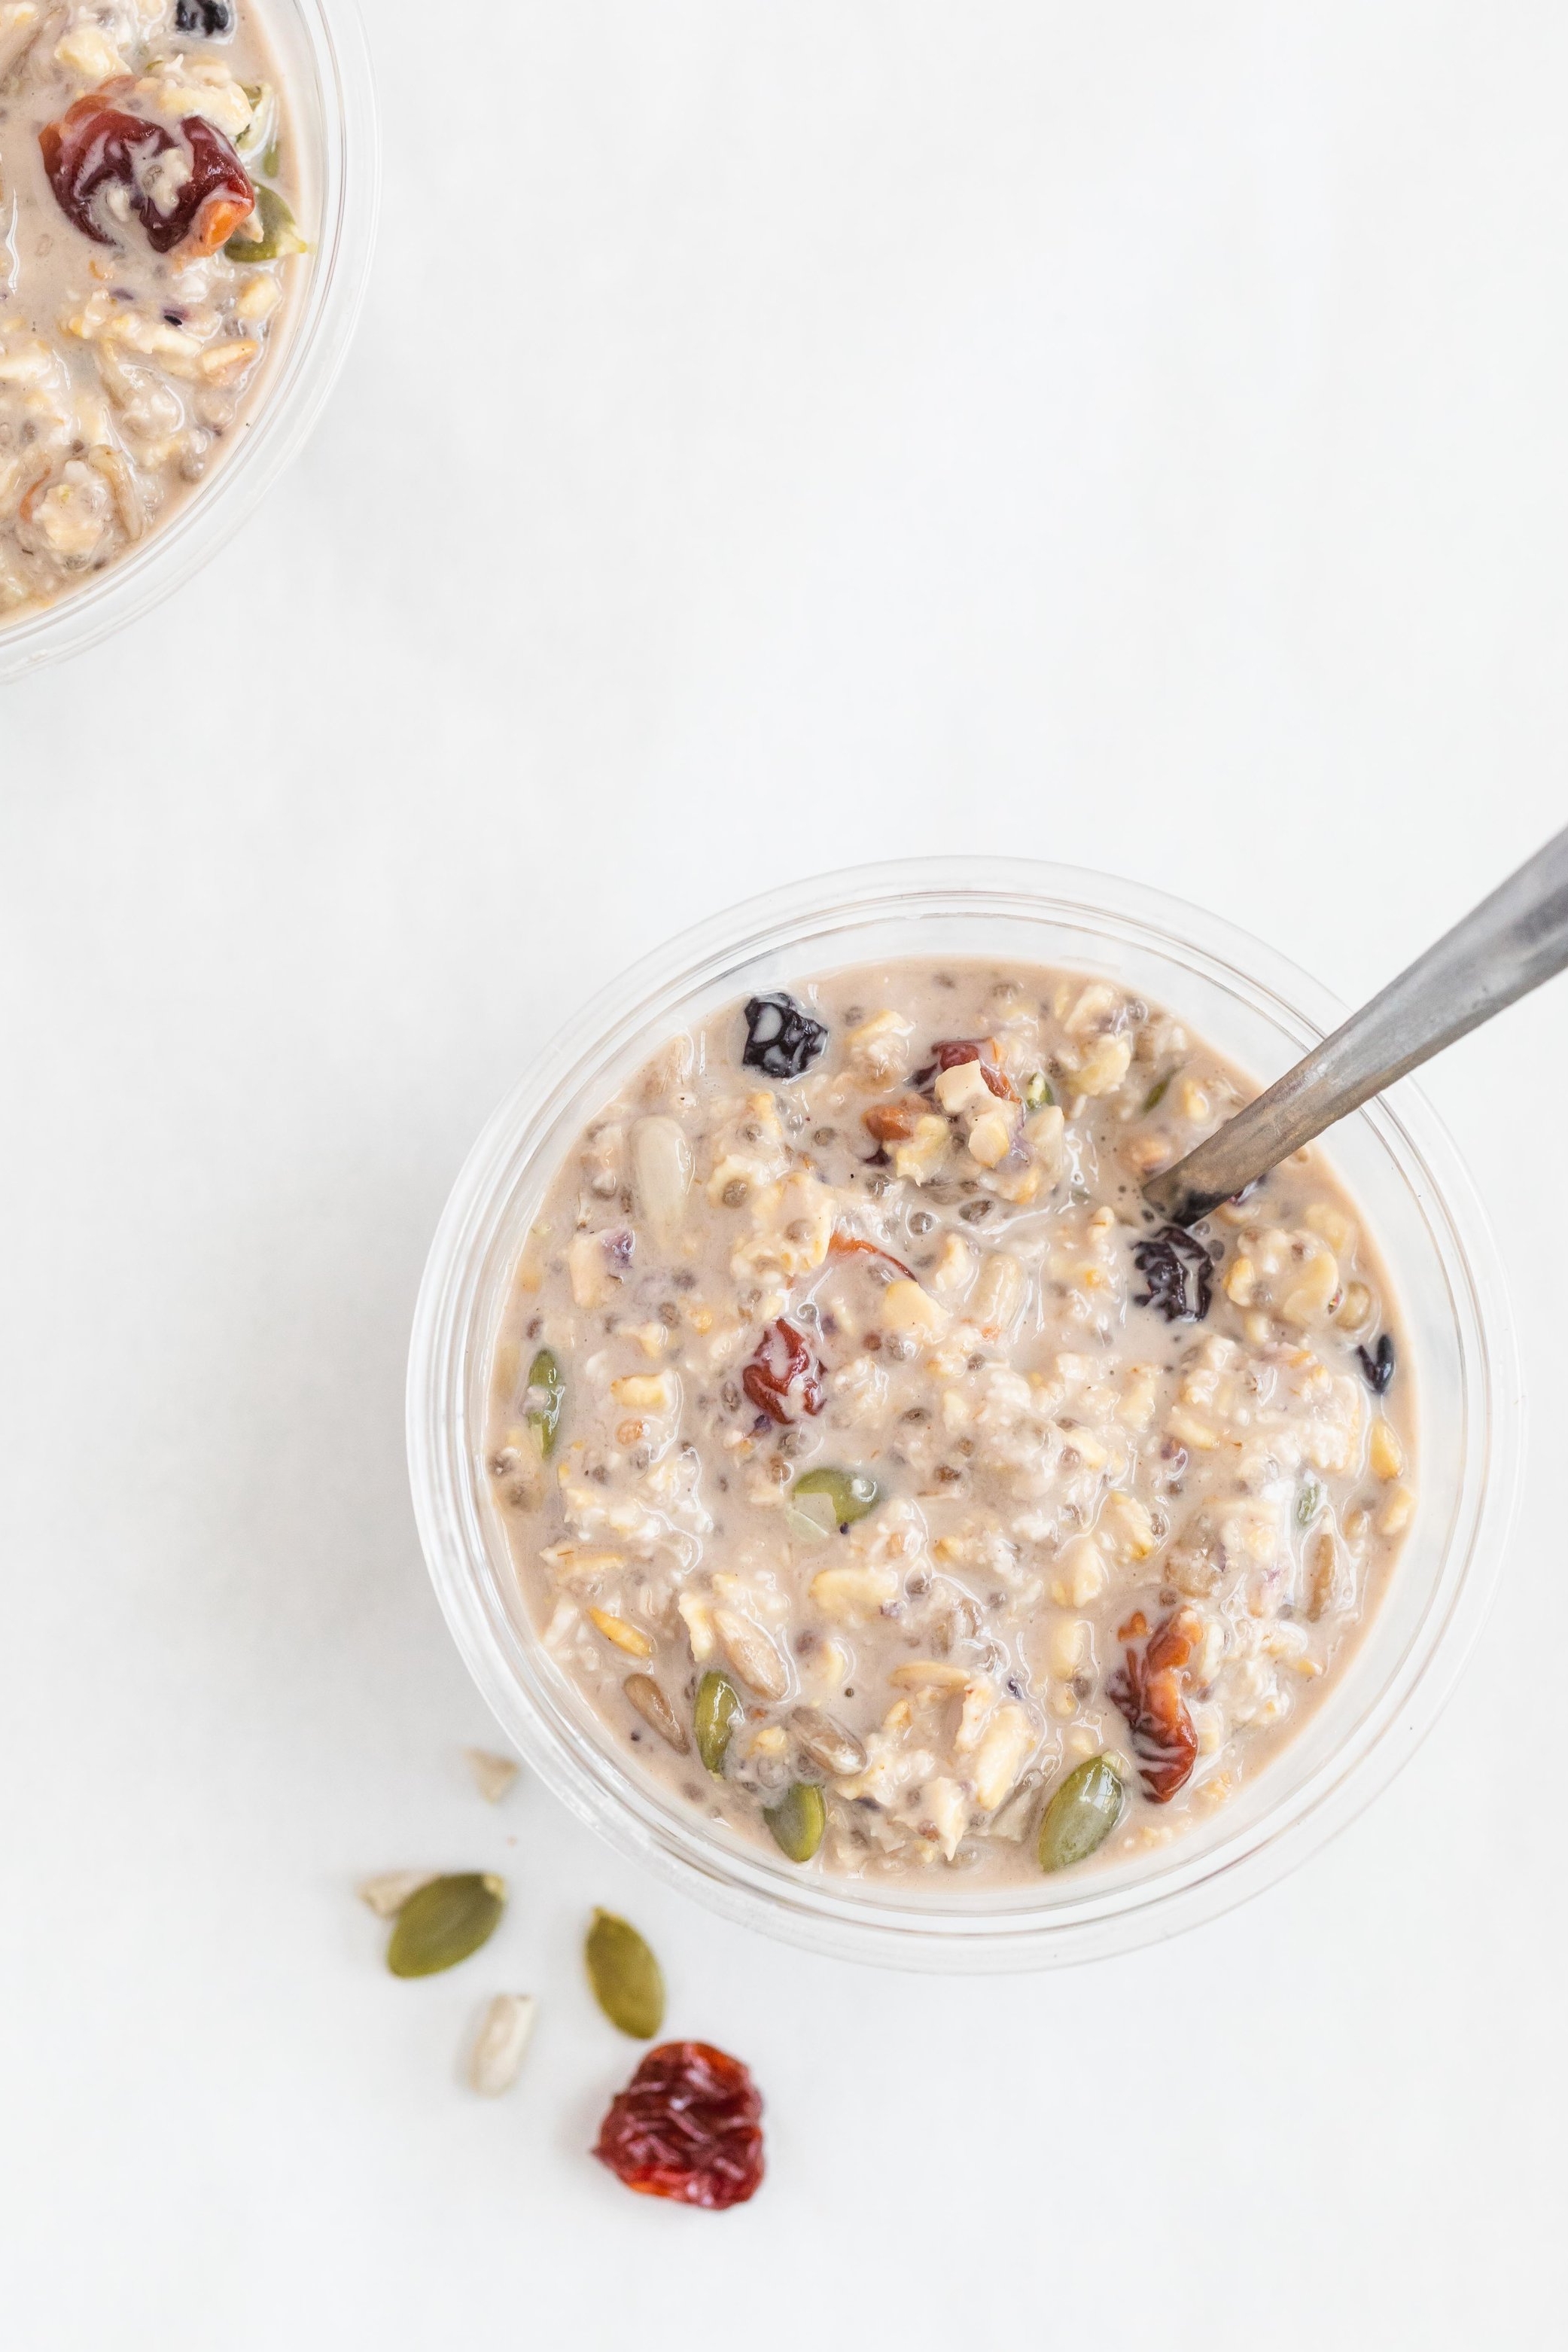 https://images.squarespace-cdn.com/content/v1/5be4ea9b55b02cf09b6748bd/1544137345765-8WLJGIUT64KCGXX755RC/Overnight+Oats+with+Dried+Cherries+and+Blueberries